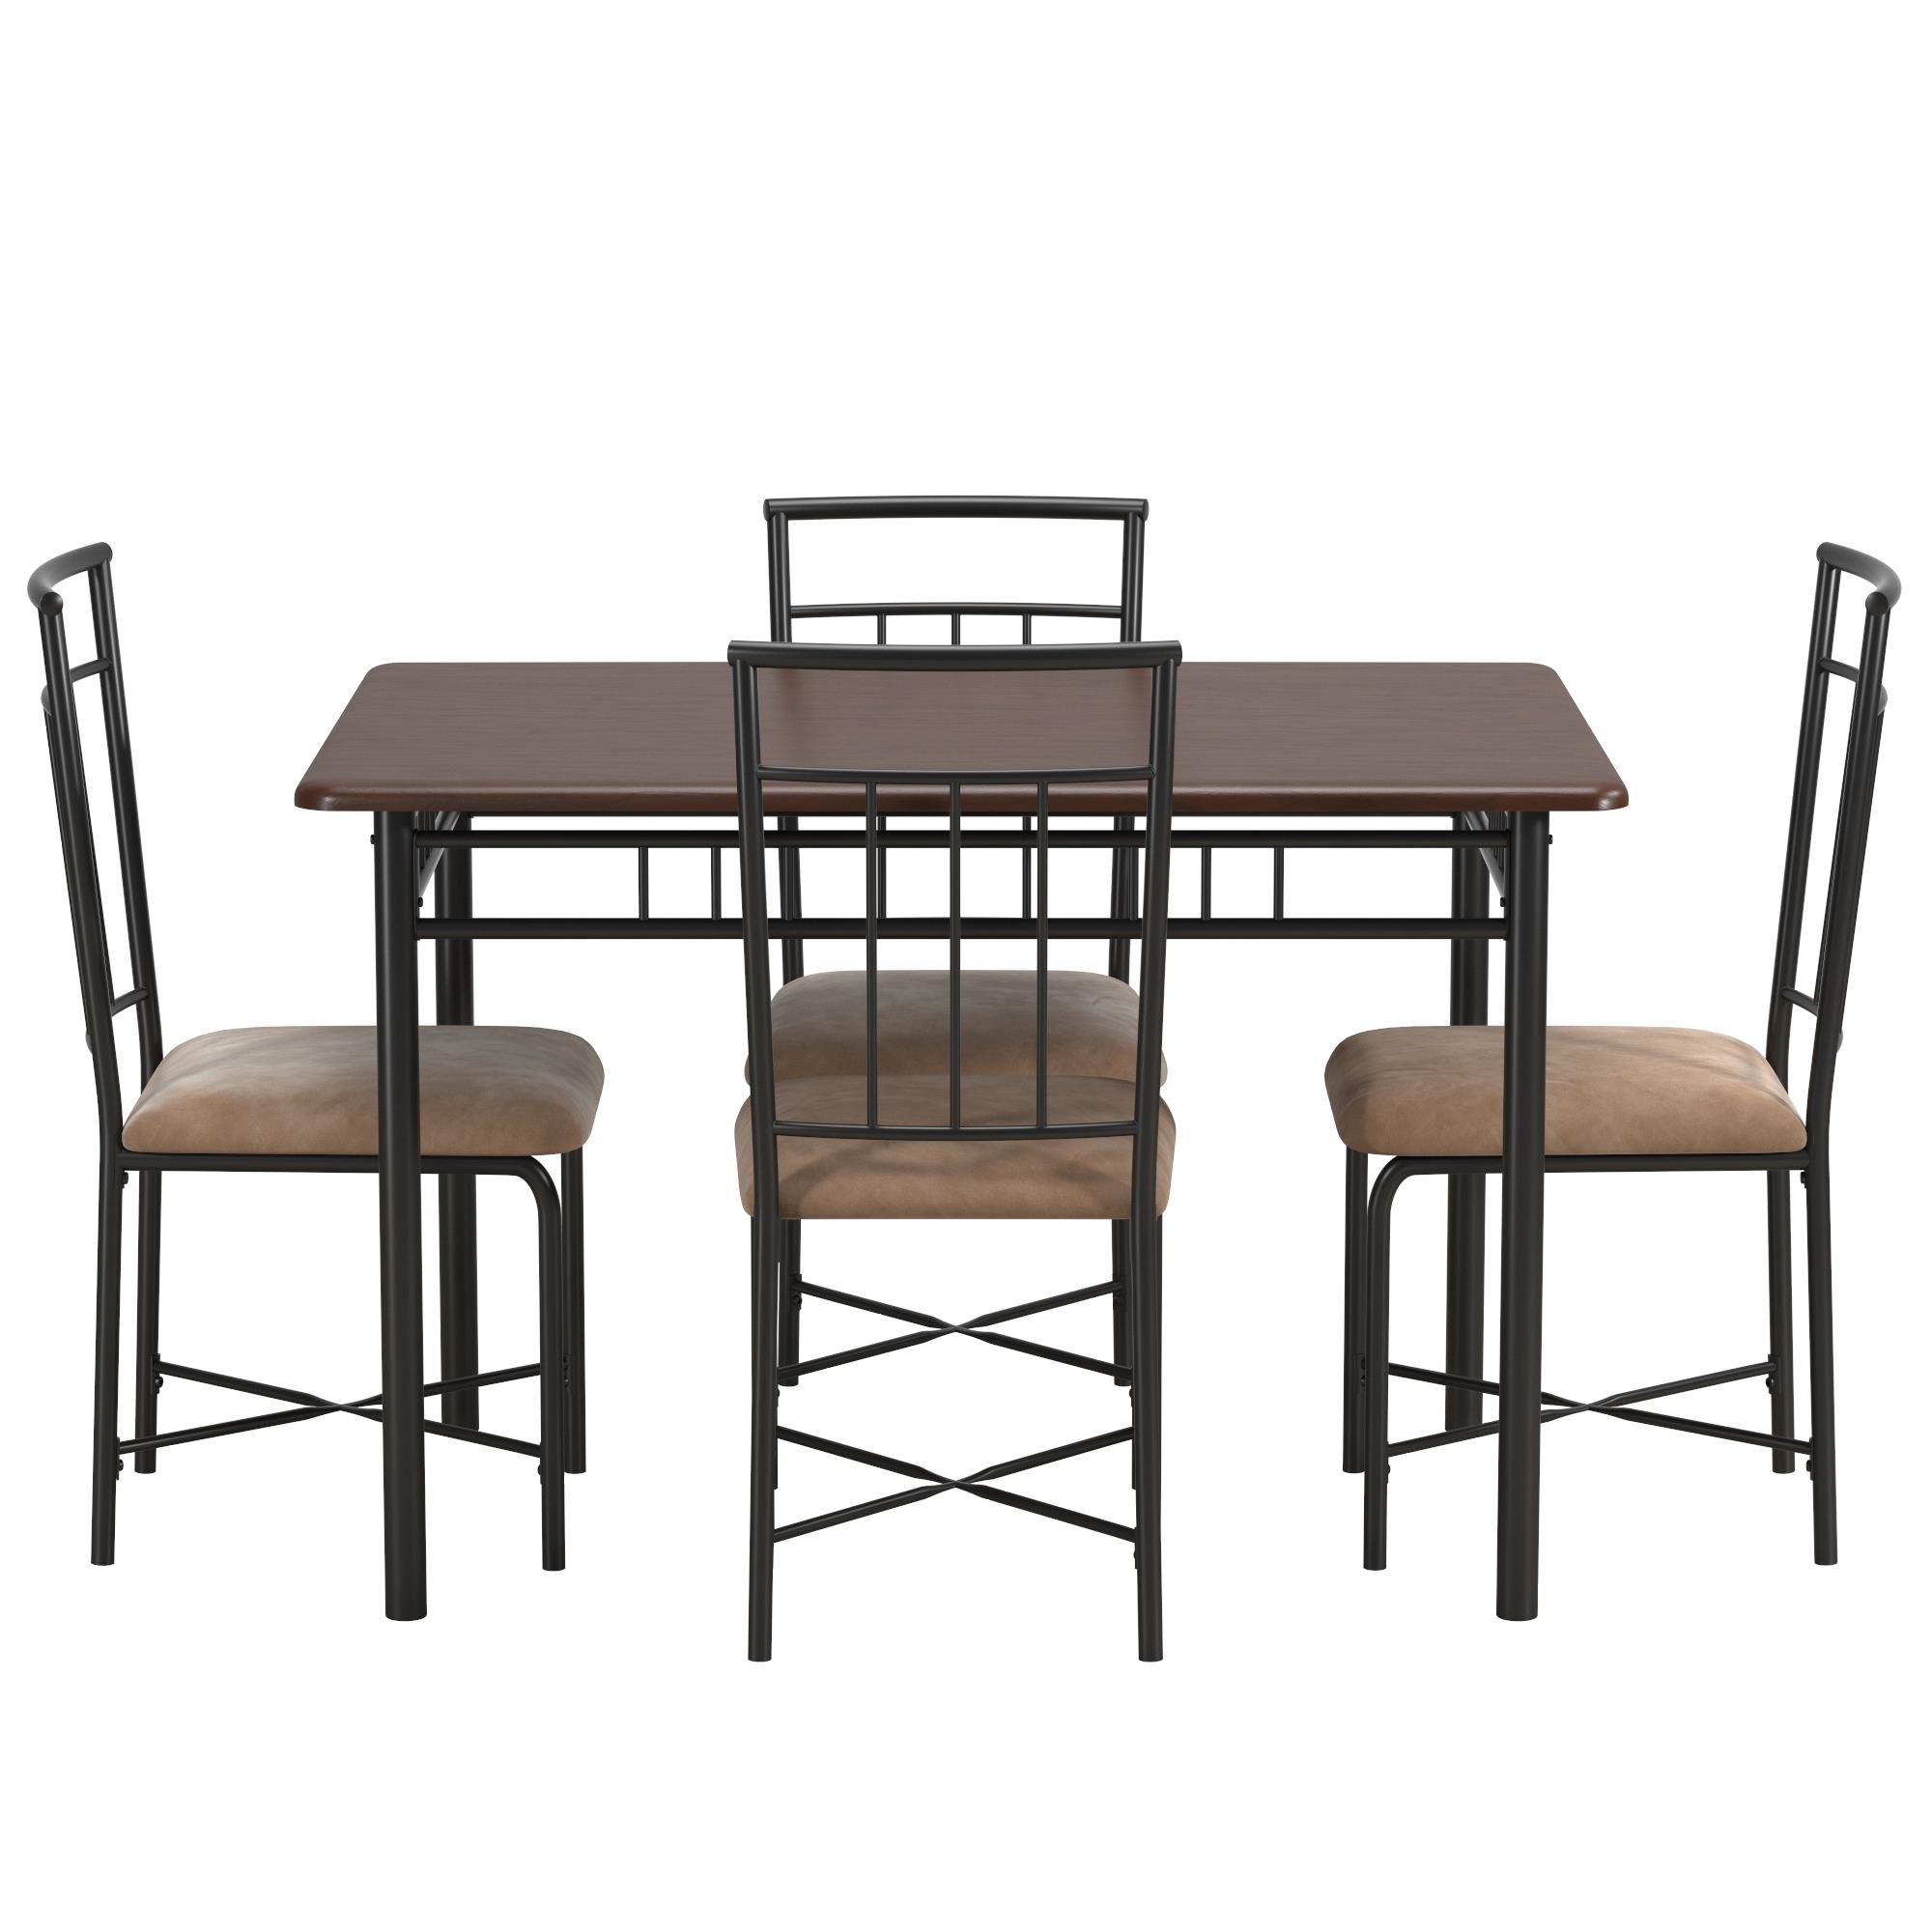 Mainstays Louise Traditional 5-Piece Wood & Metal Dining Set, Deep Walnut - image 5 of 22